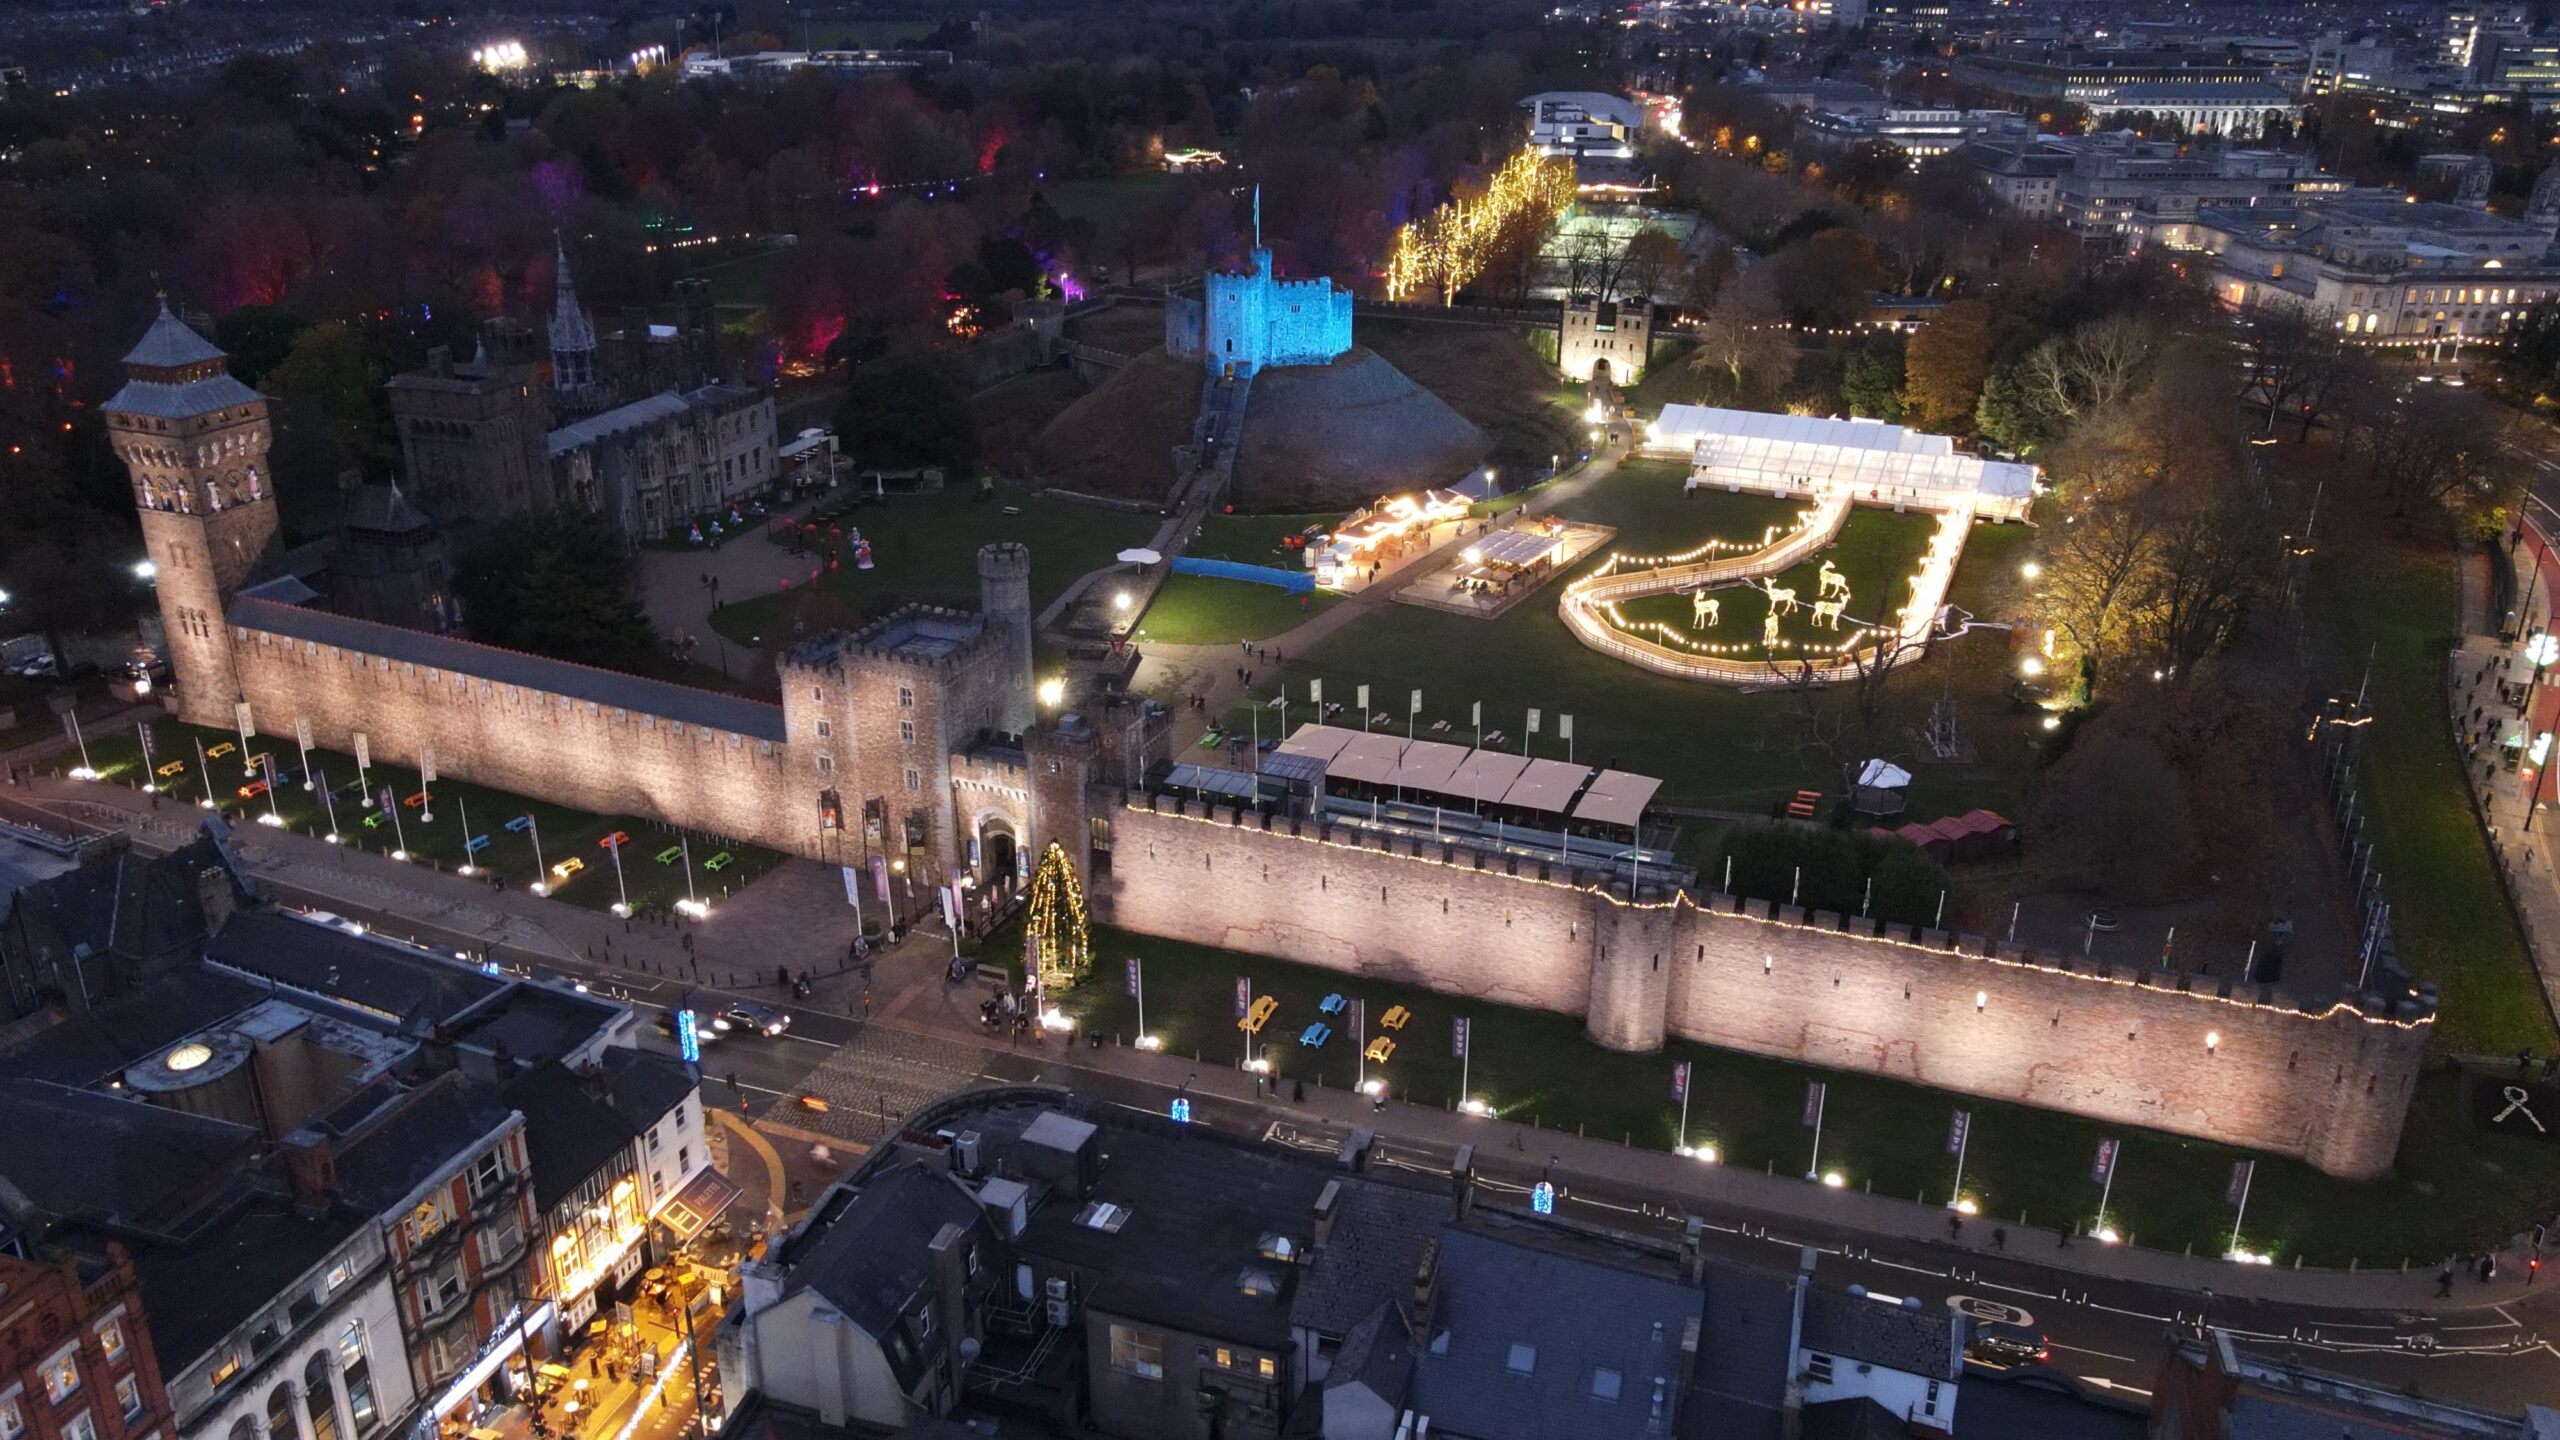 Cardiff Castle • 2000 Years of History in the Heart of the City